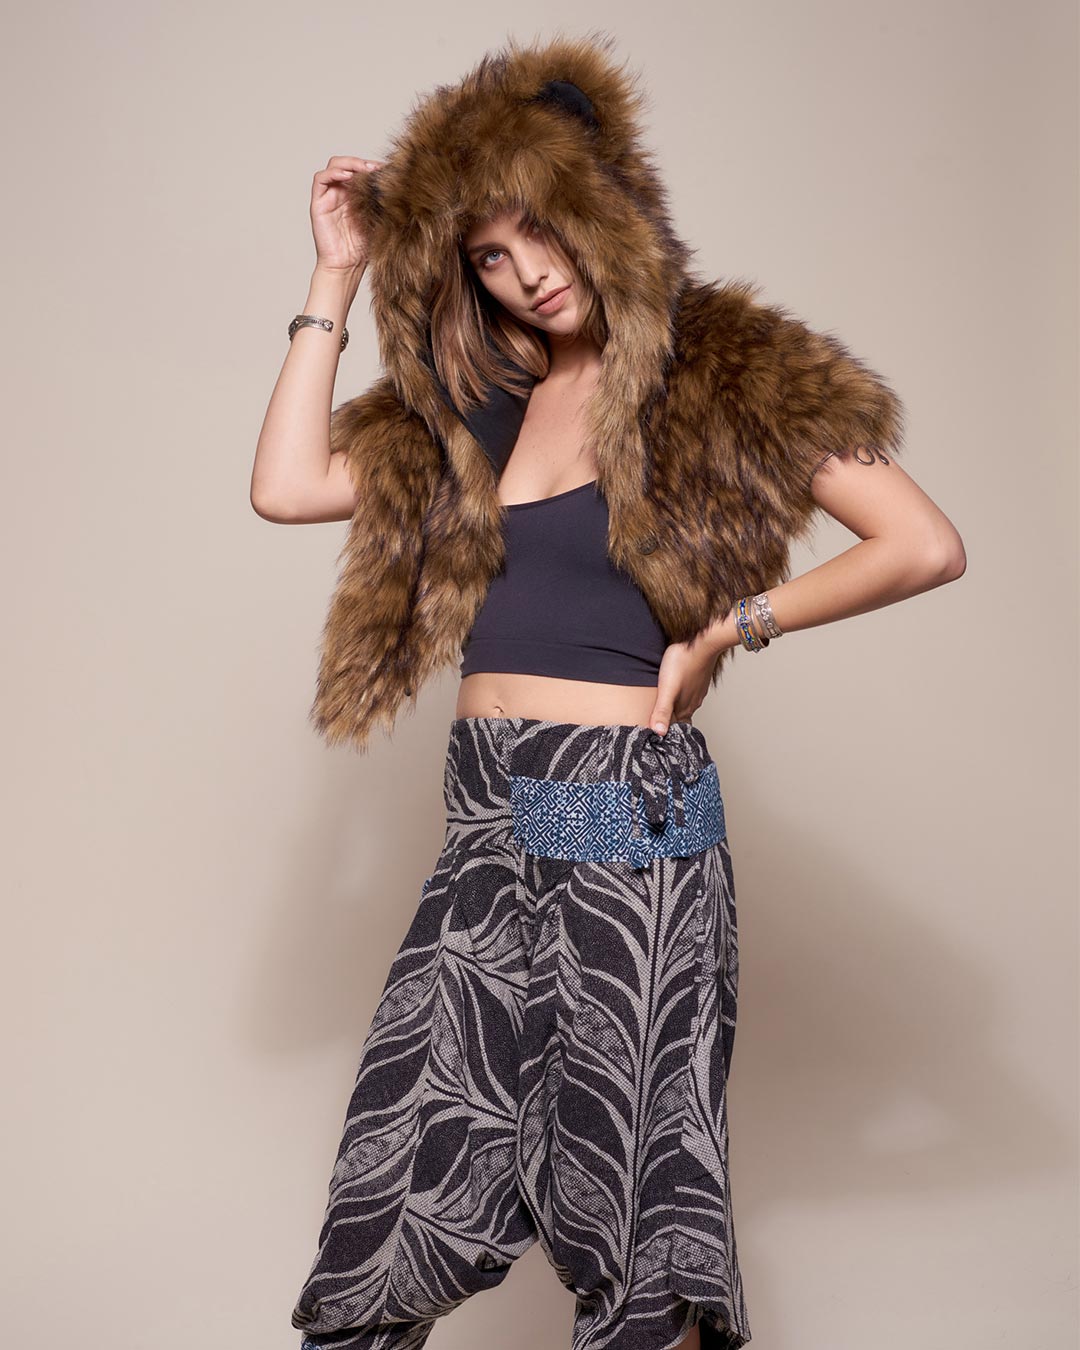 Hooded Grizzly Bear Faux Fur Shawl on Female